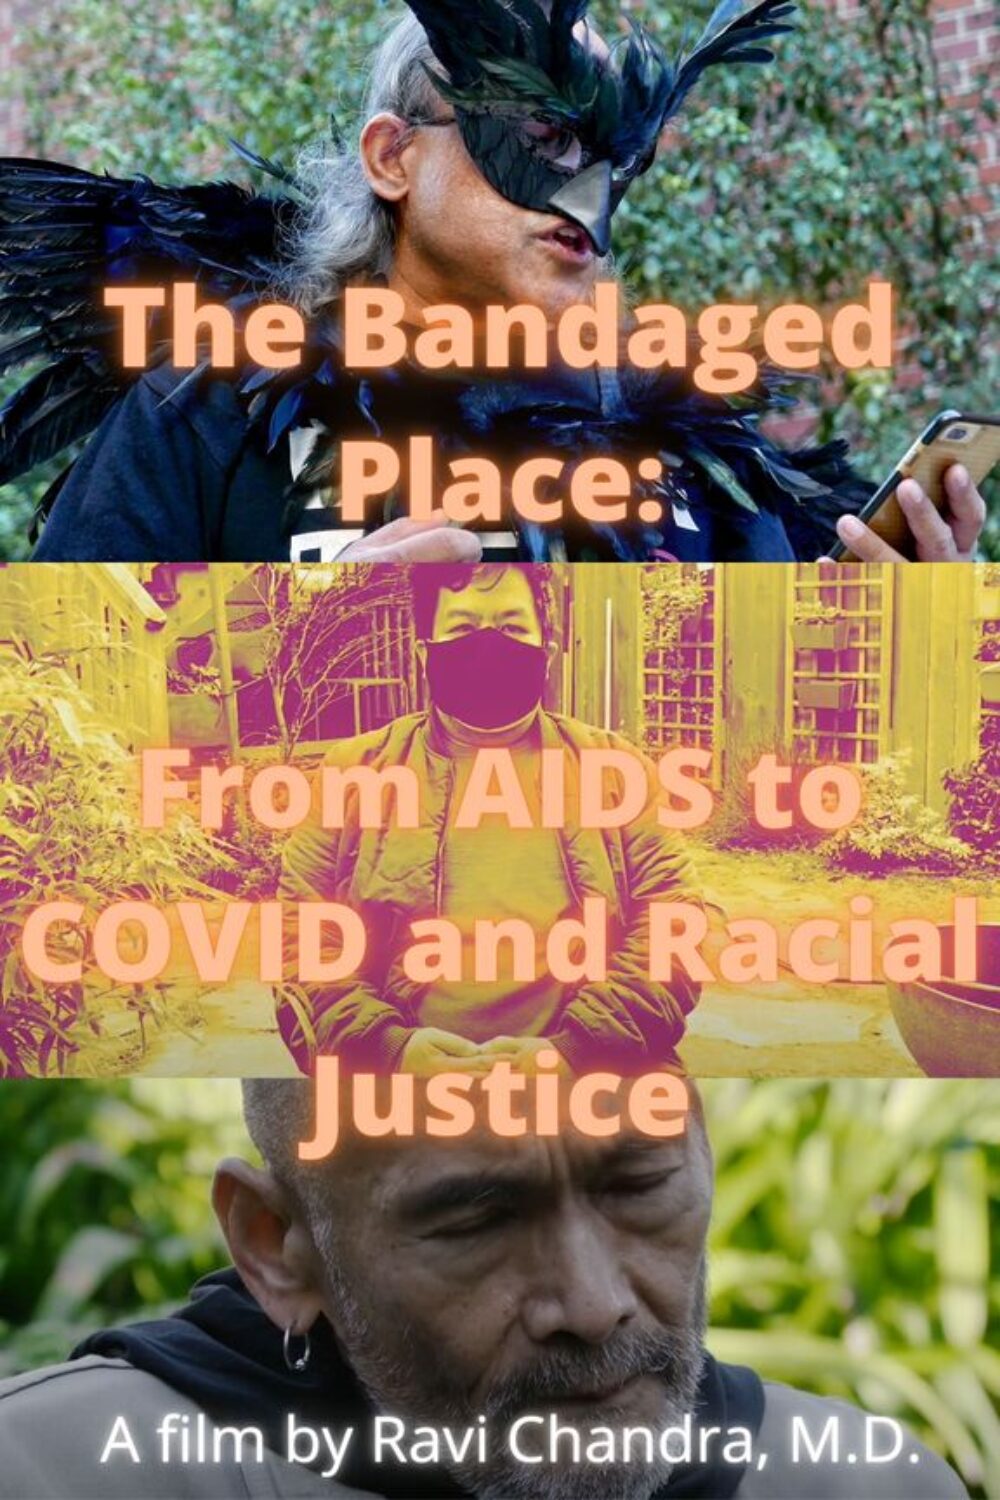 Poster small – The Bandaged Place_ From AIDS to COVID and Racial Justice